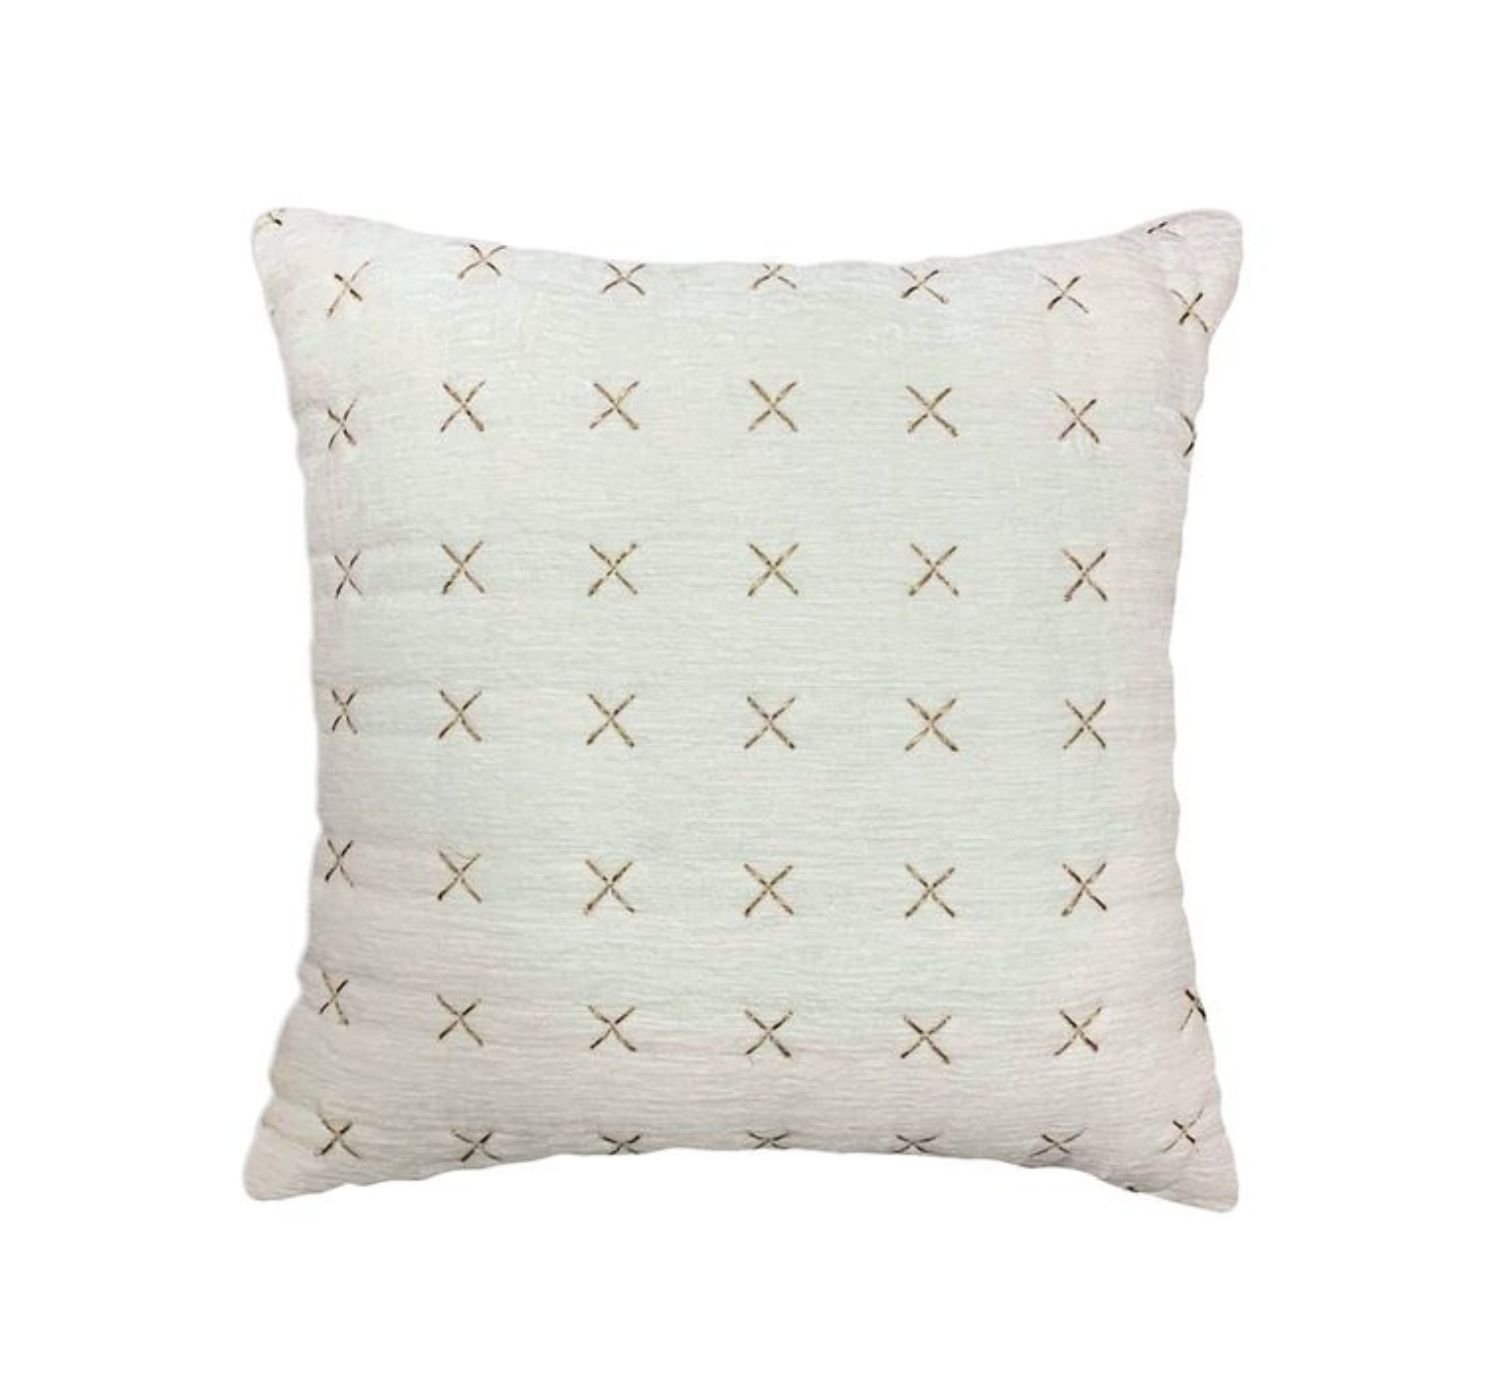 Tracey Boyd Michelle Ivory Quilted Pillow.jpg